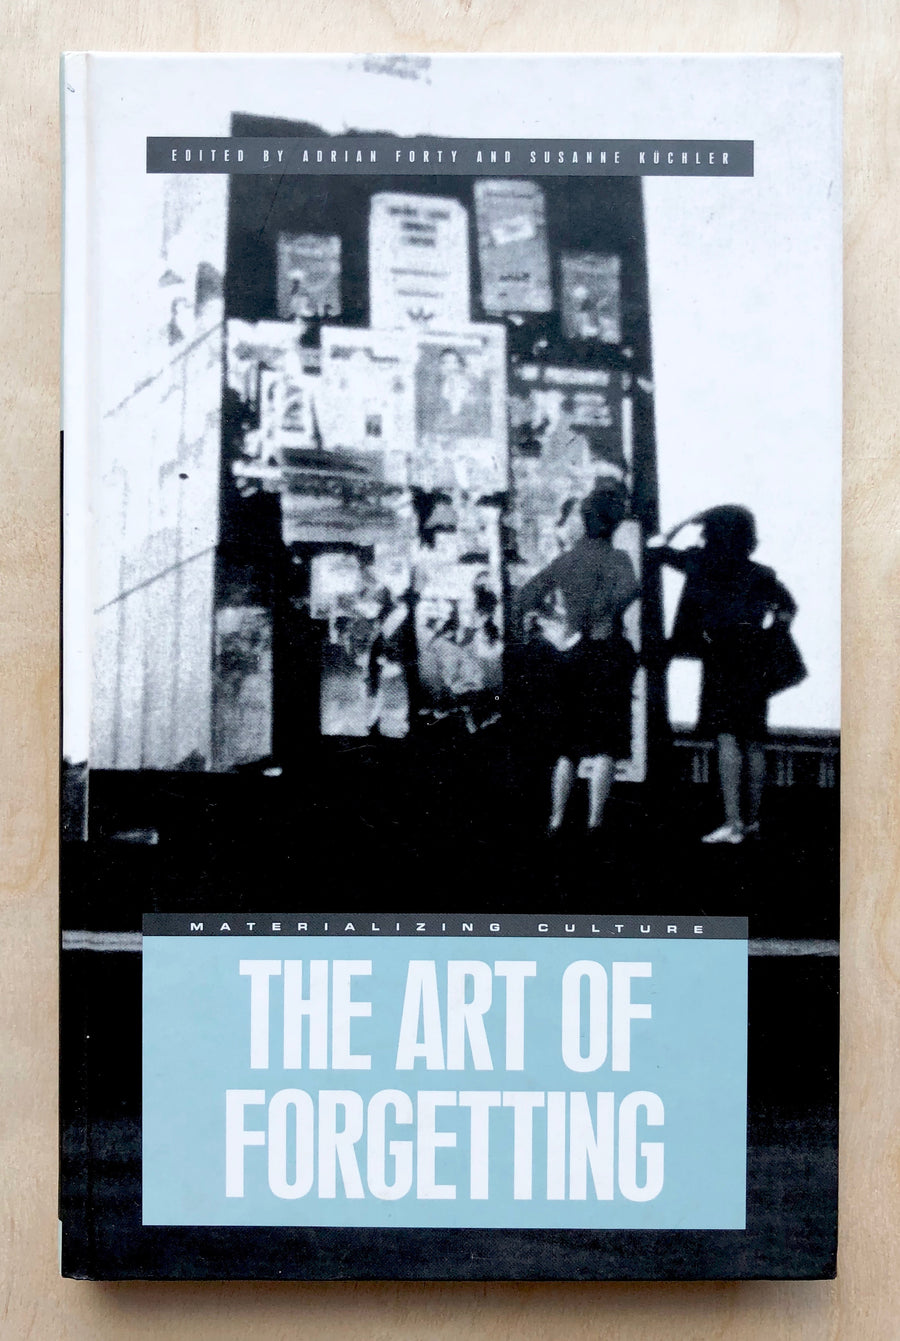 THE ART OF FORGETTING (MATERIALIZING CULTURE) edited by Adrian Forty and Susanne Küchler